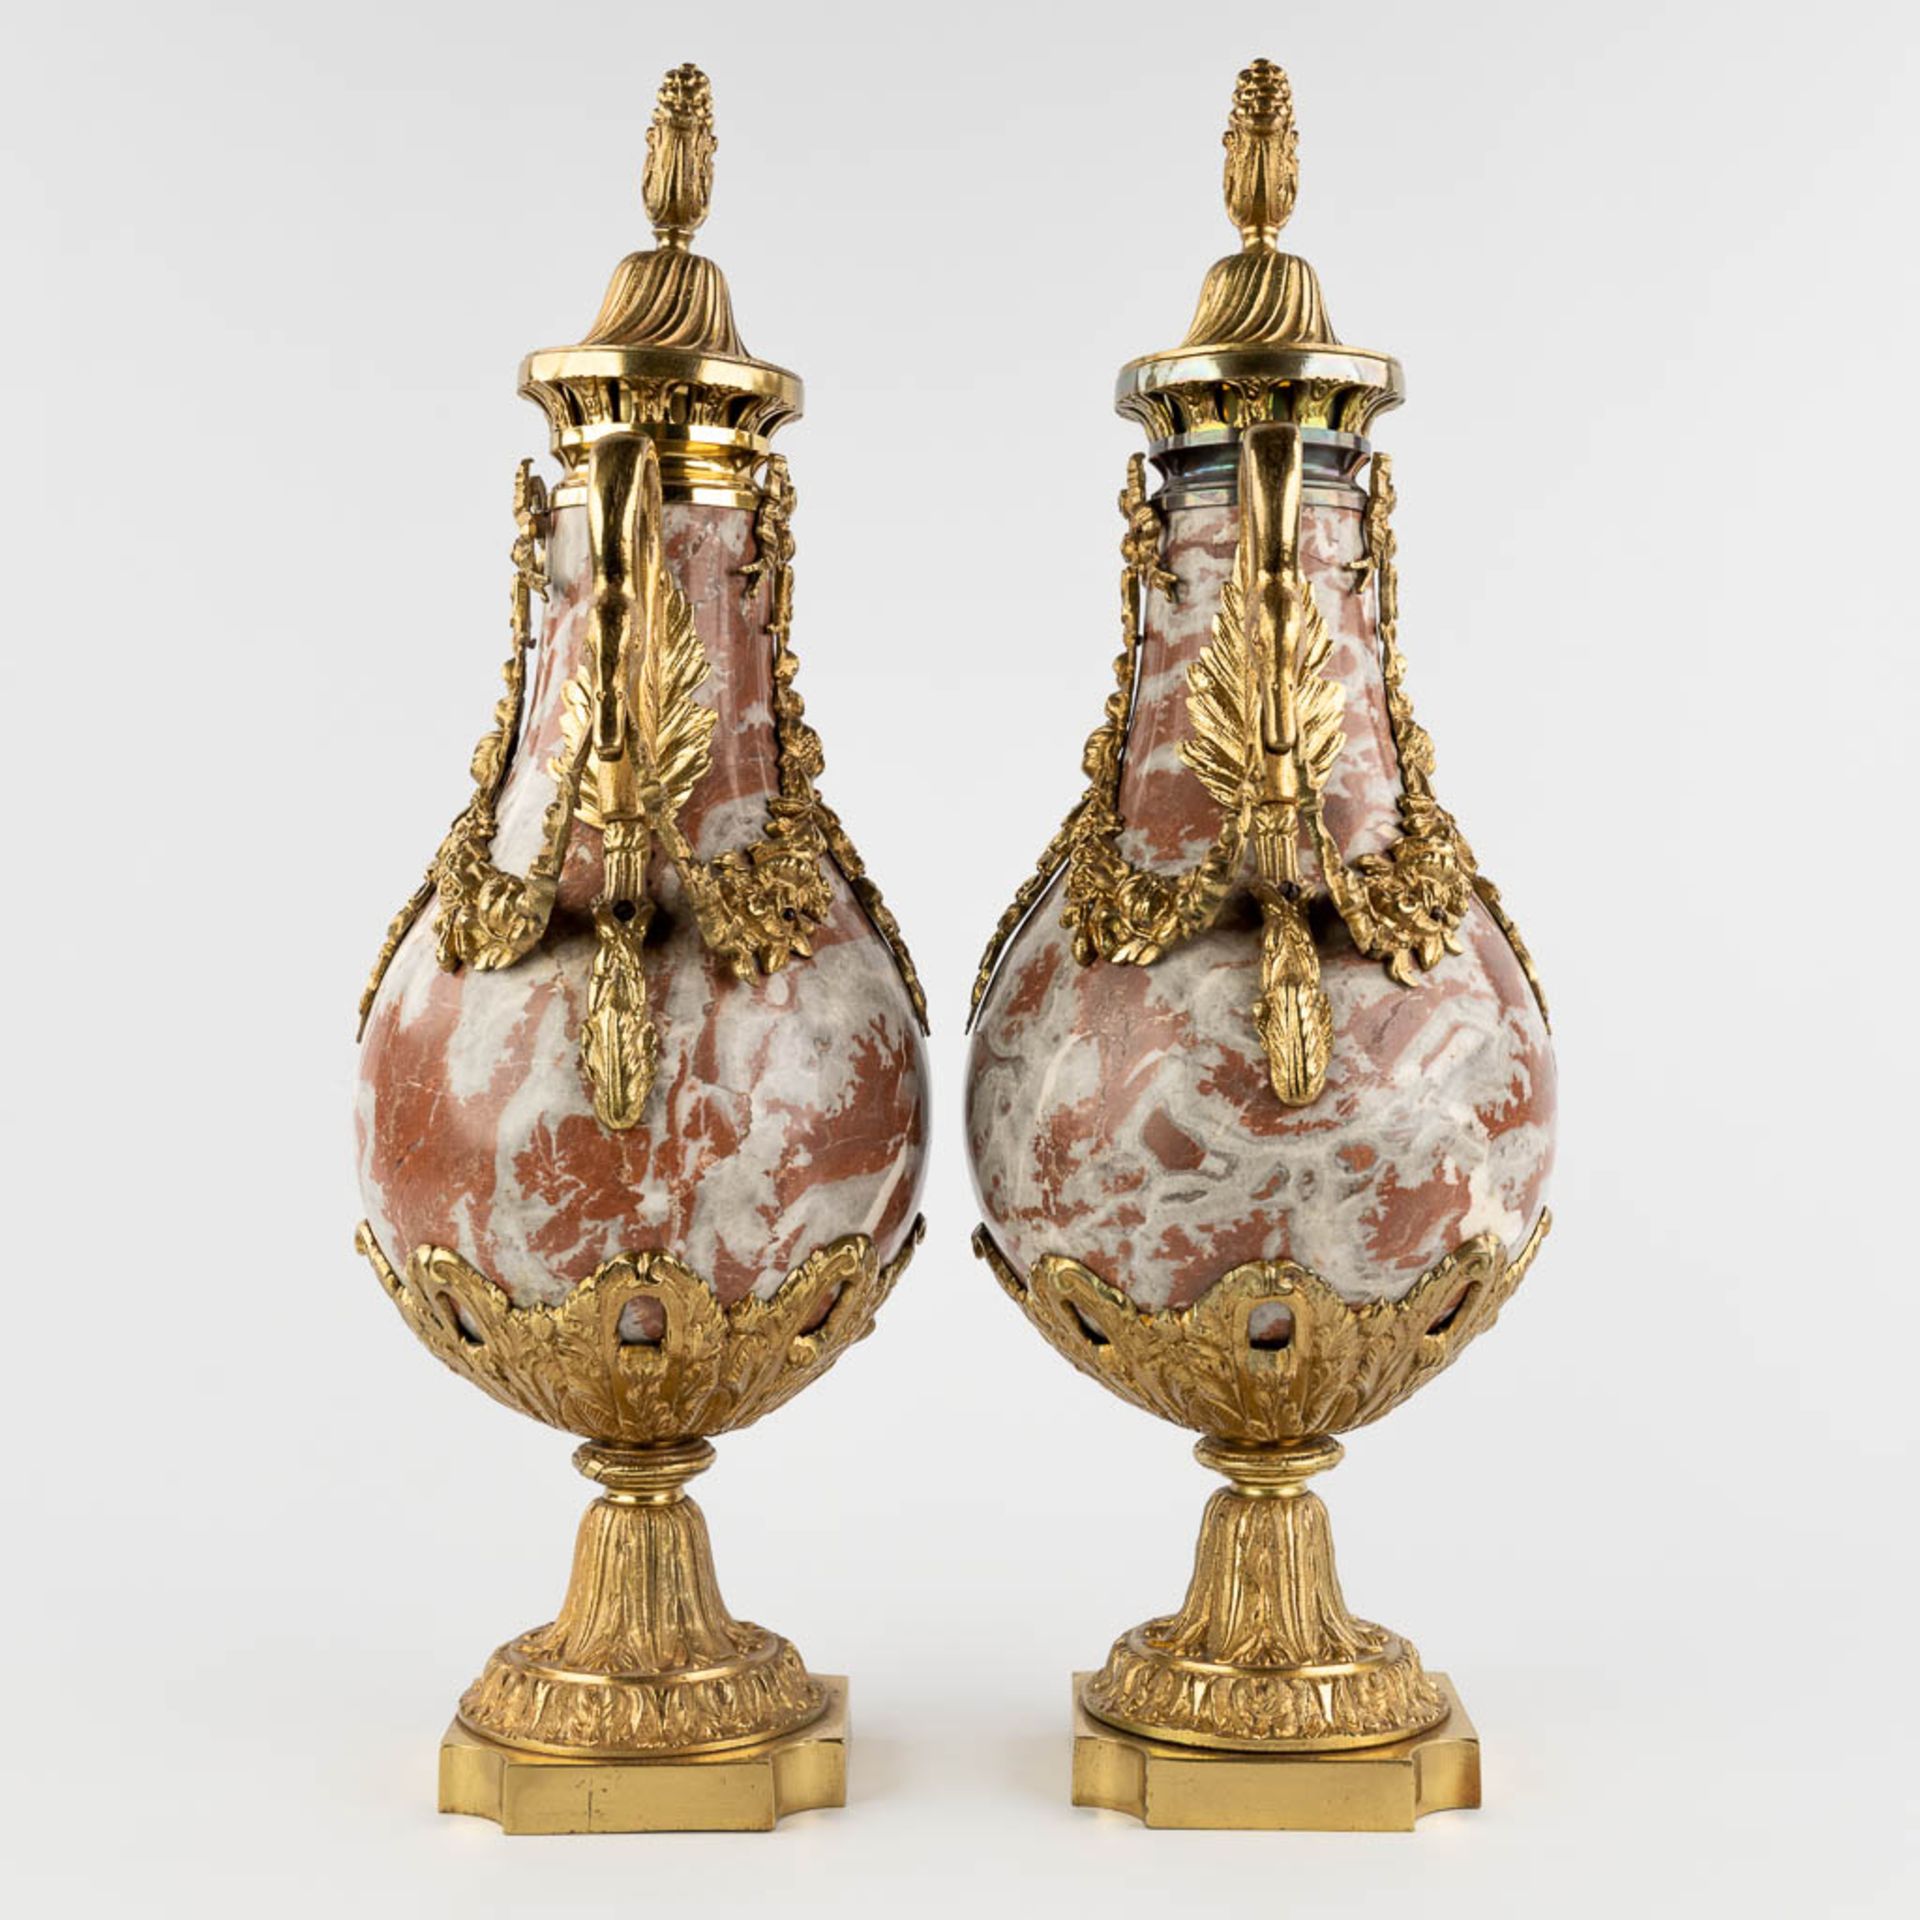 A pair of cassolettes, red and grey marble mounted with bronze in Empire style. (D:18 x W:23 x H:54  - Bild 4 aus 13